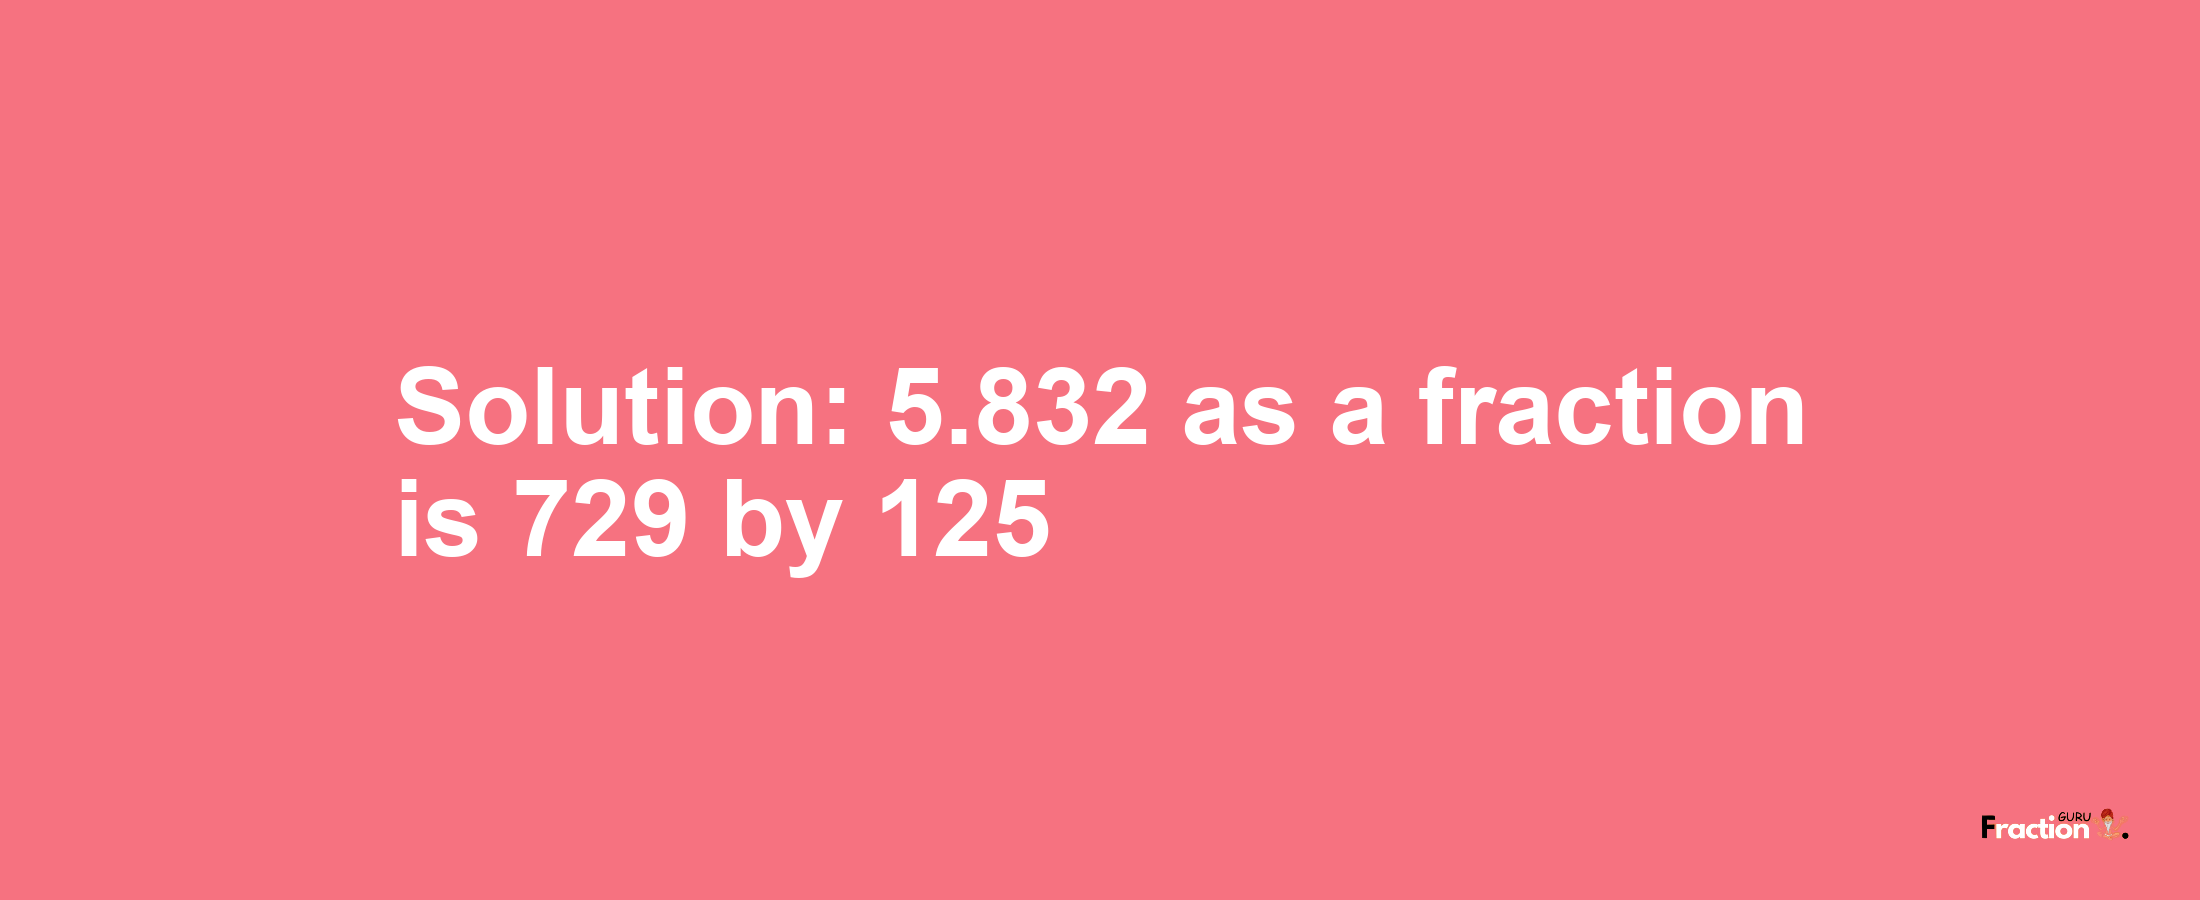 Solution:5.832 as a fraction is 729/125